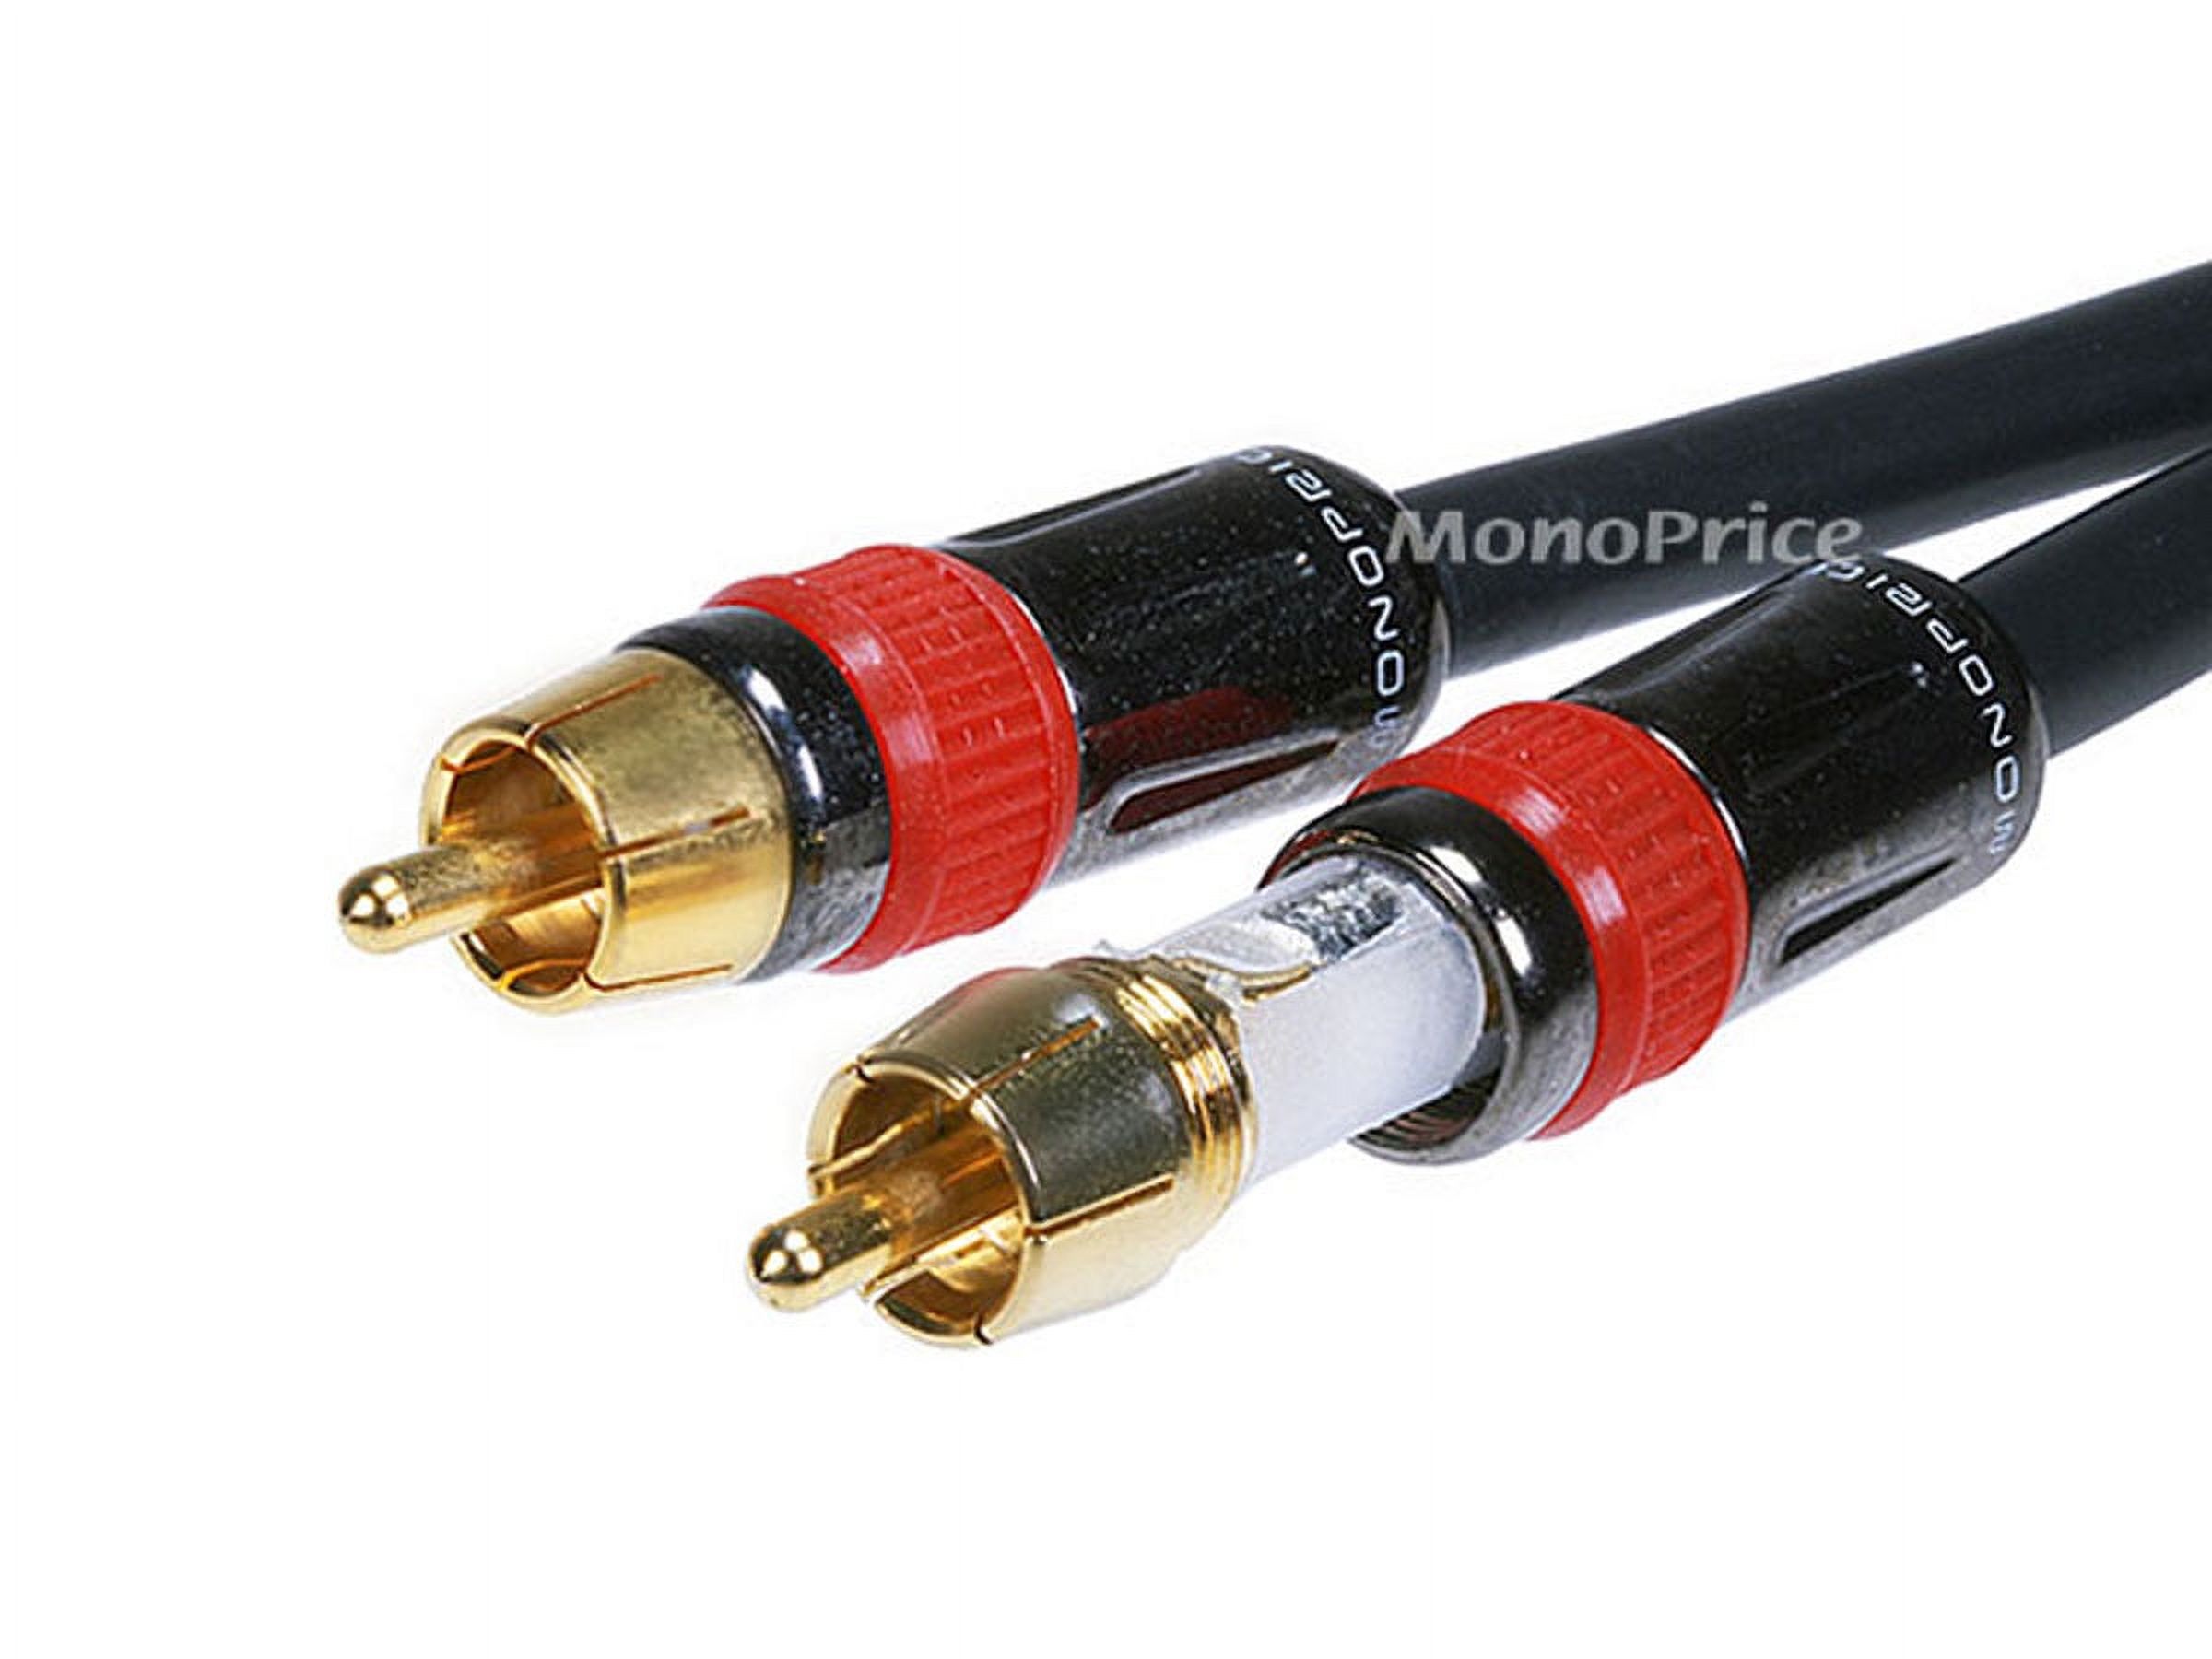 Monoprice Digital Coaxial Cable - 0.5 Feet - RCA Female to 2-RCA Male Splitter Adapter, single, Gold plated - image 3 of 3